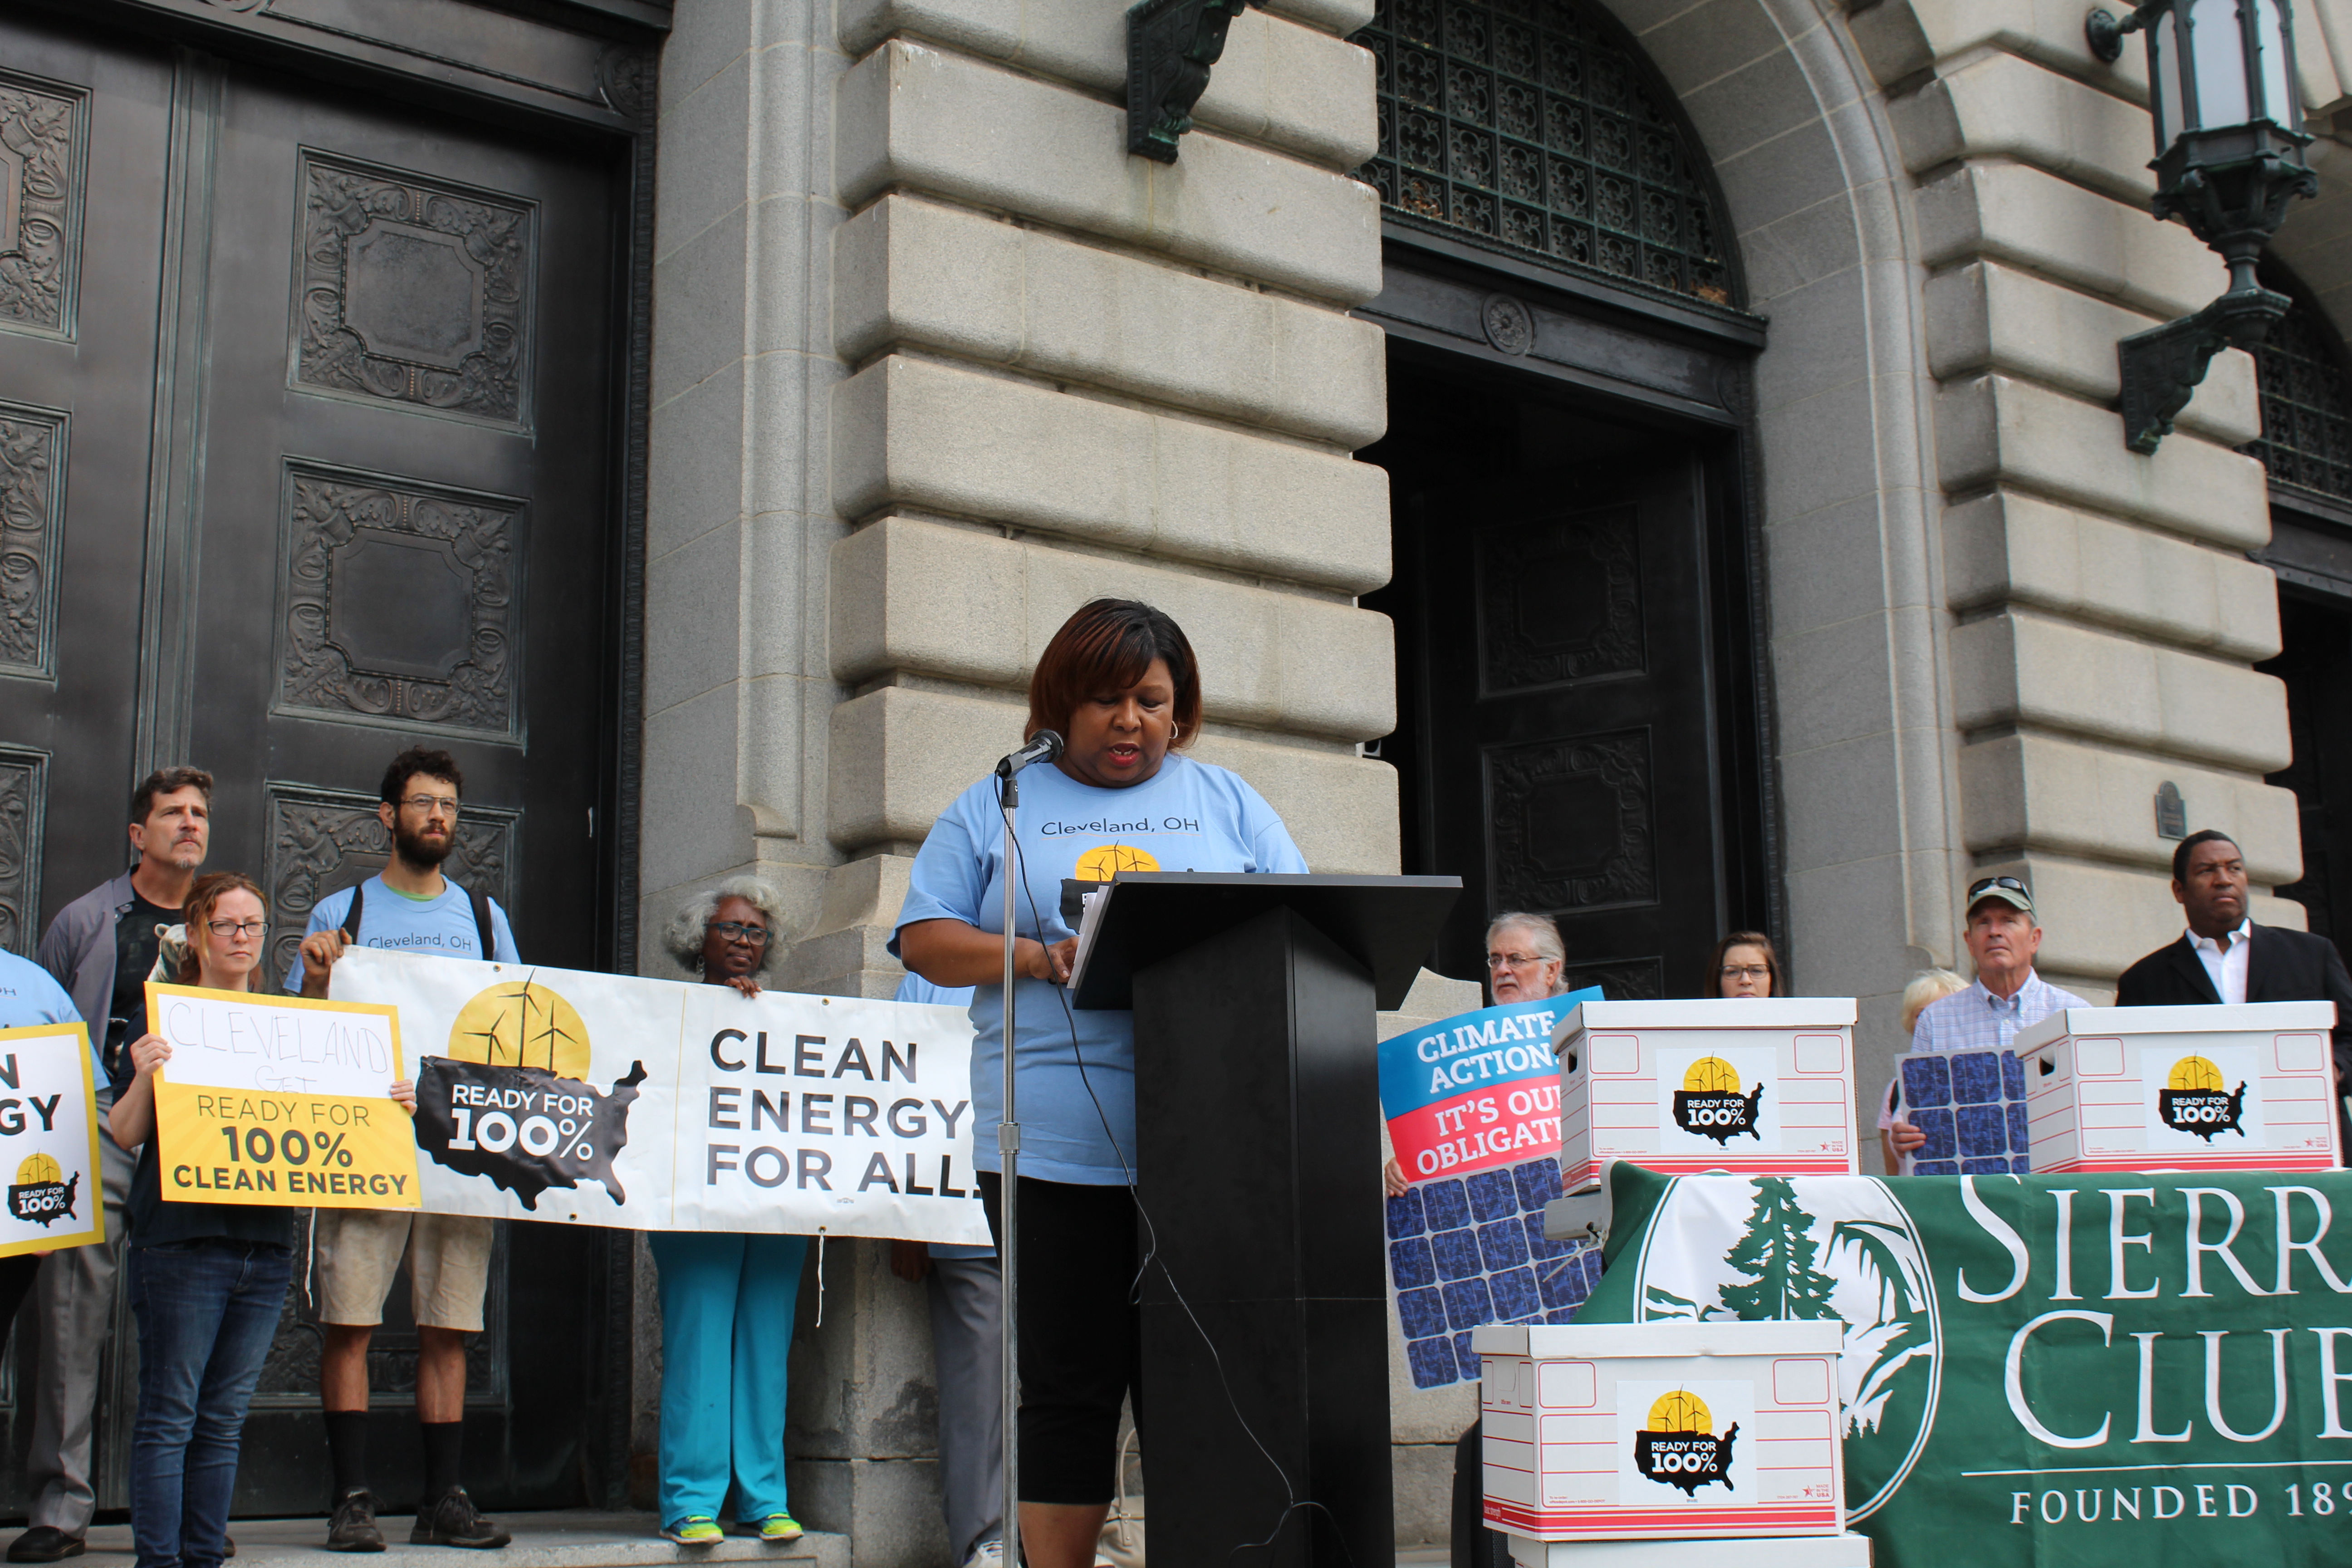 Yvonka Hall supports clean energy in Cleveland